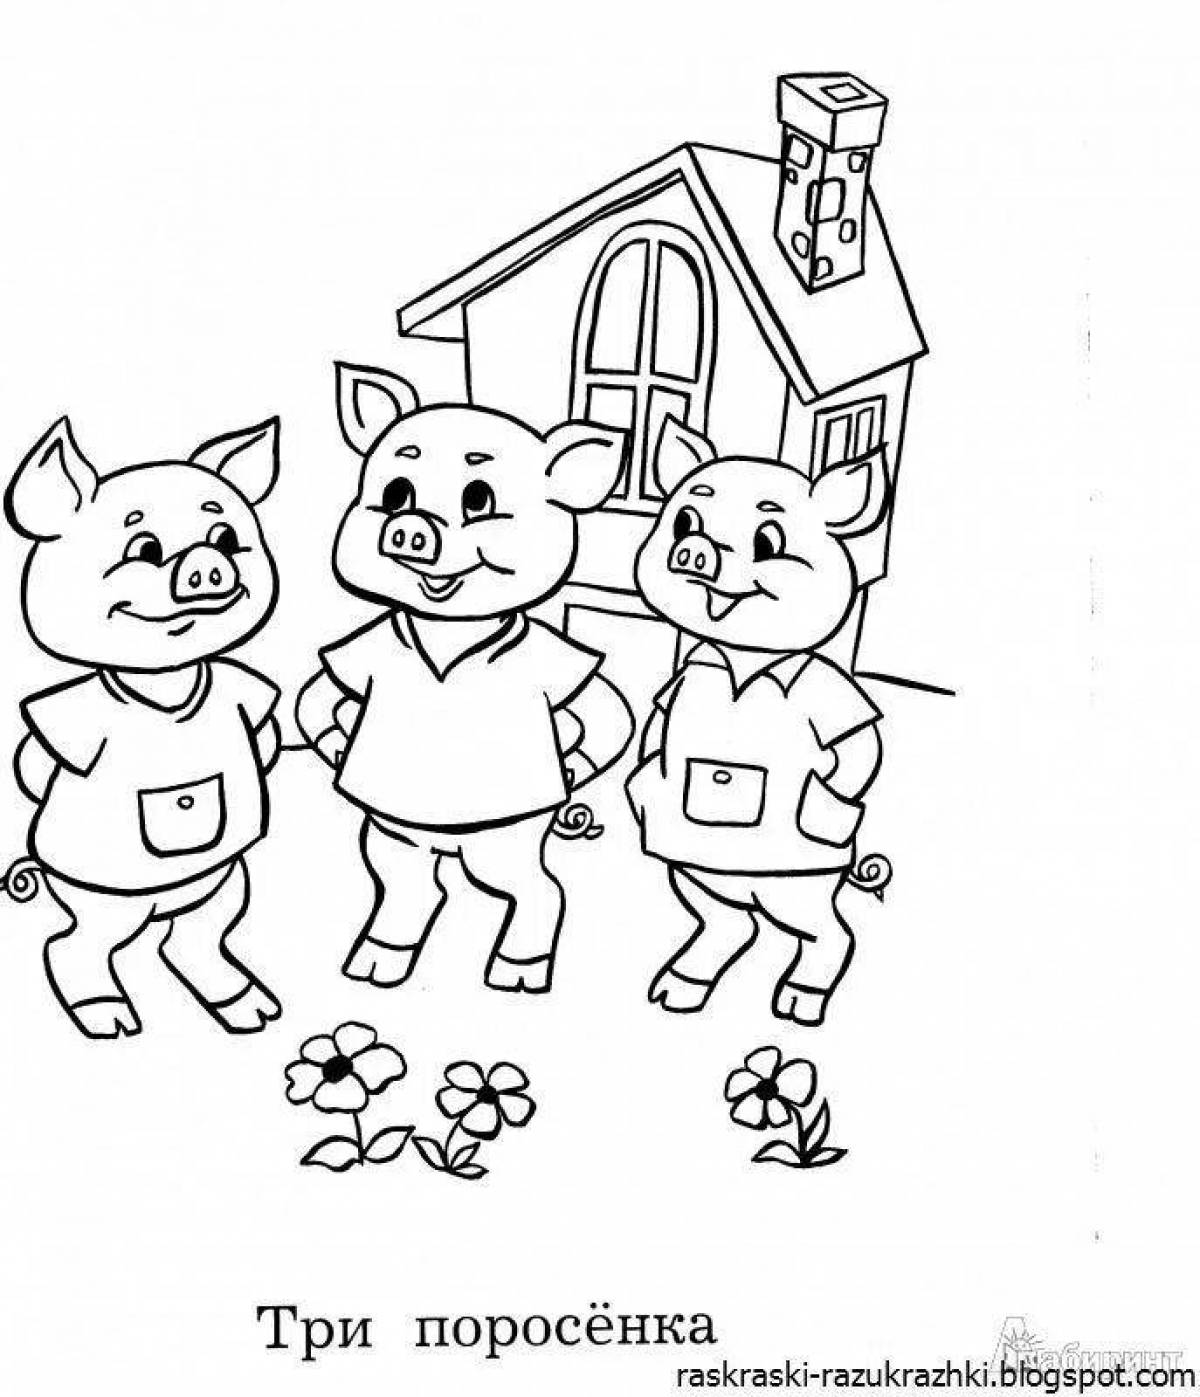 Three little pigs for kids #1